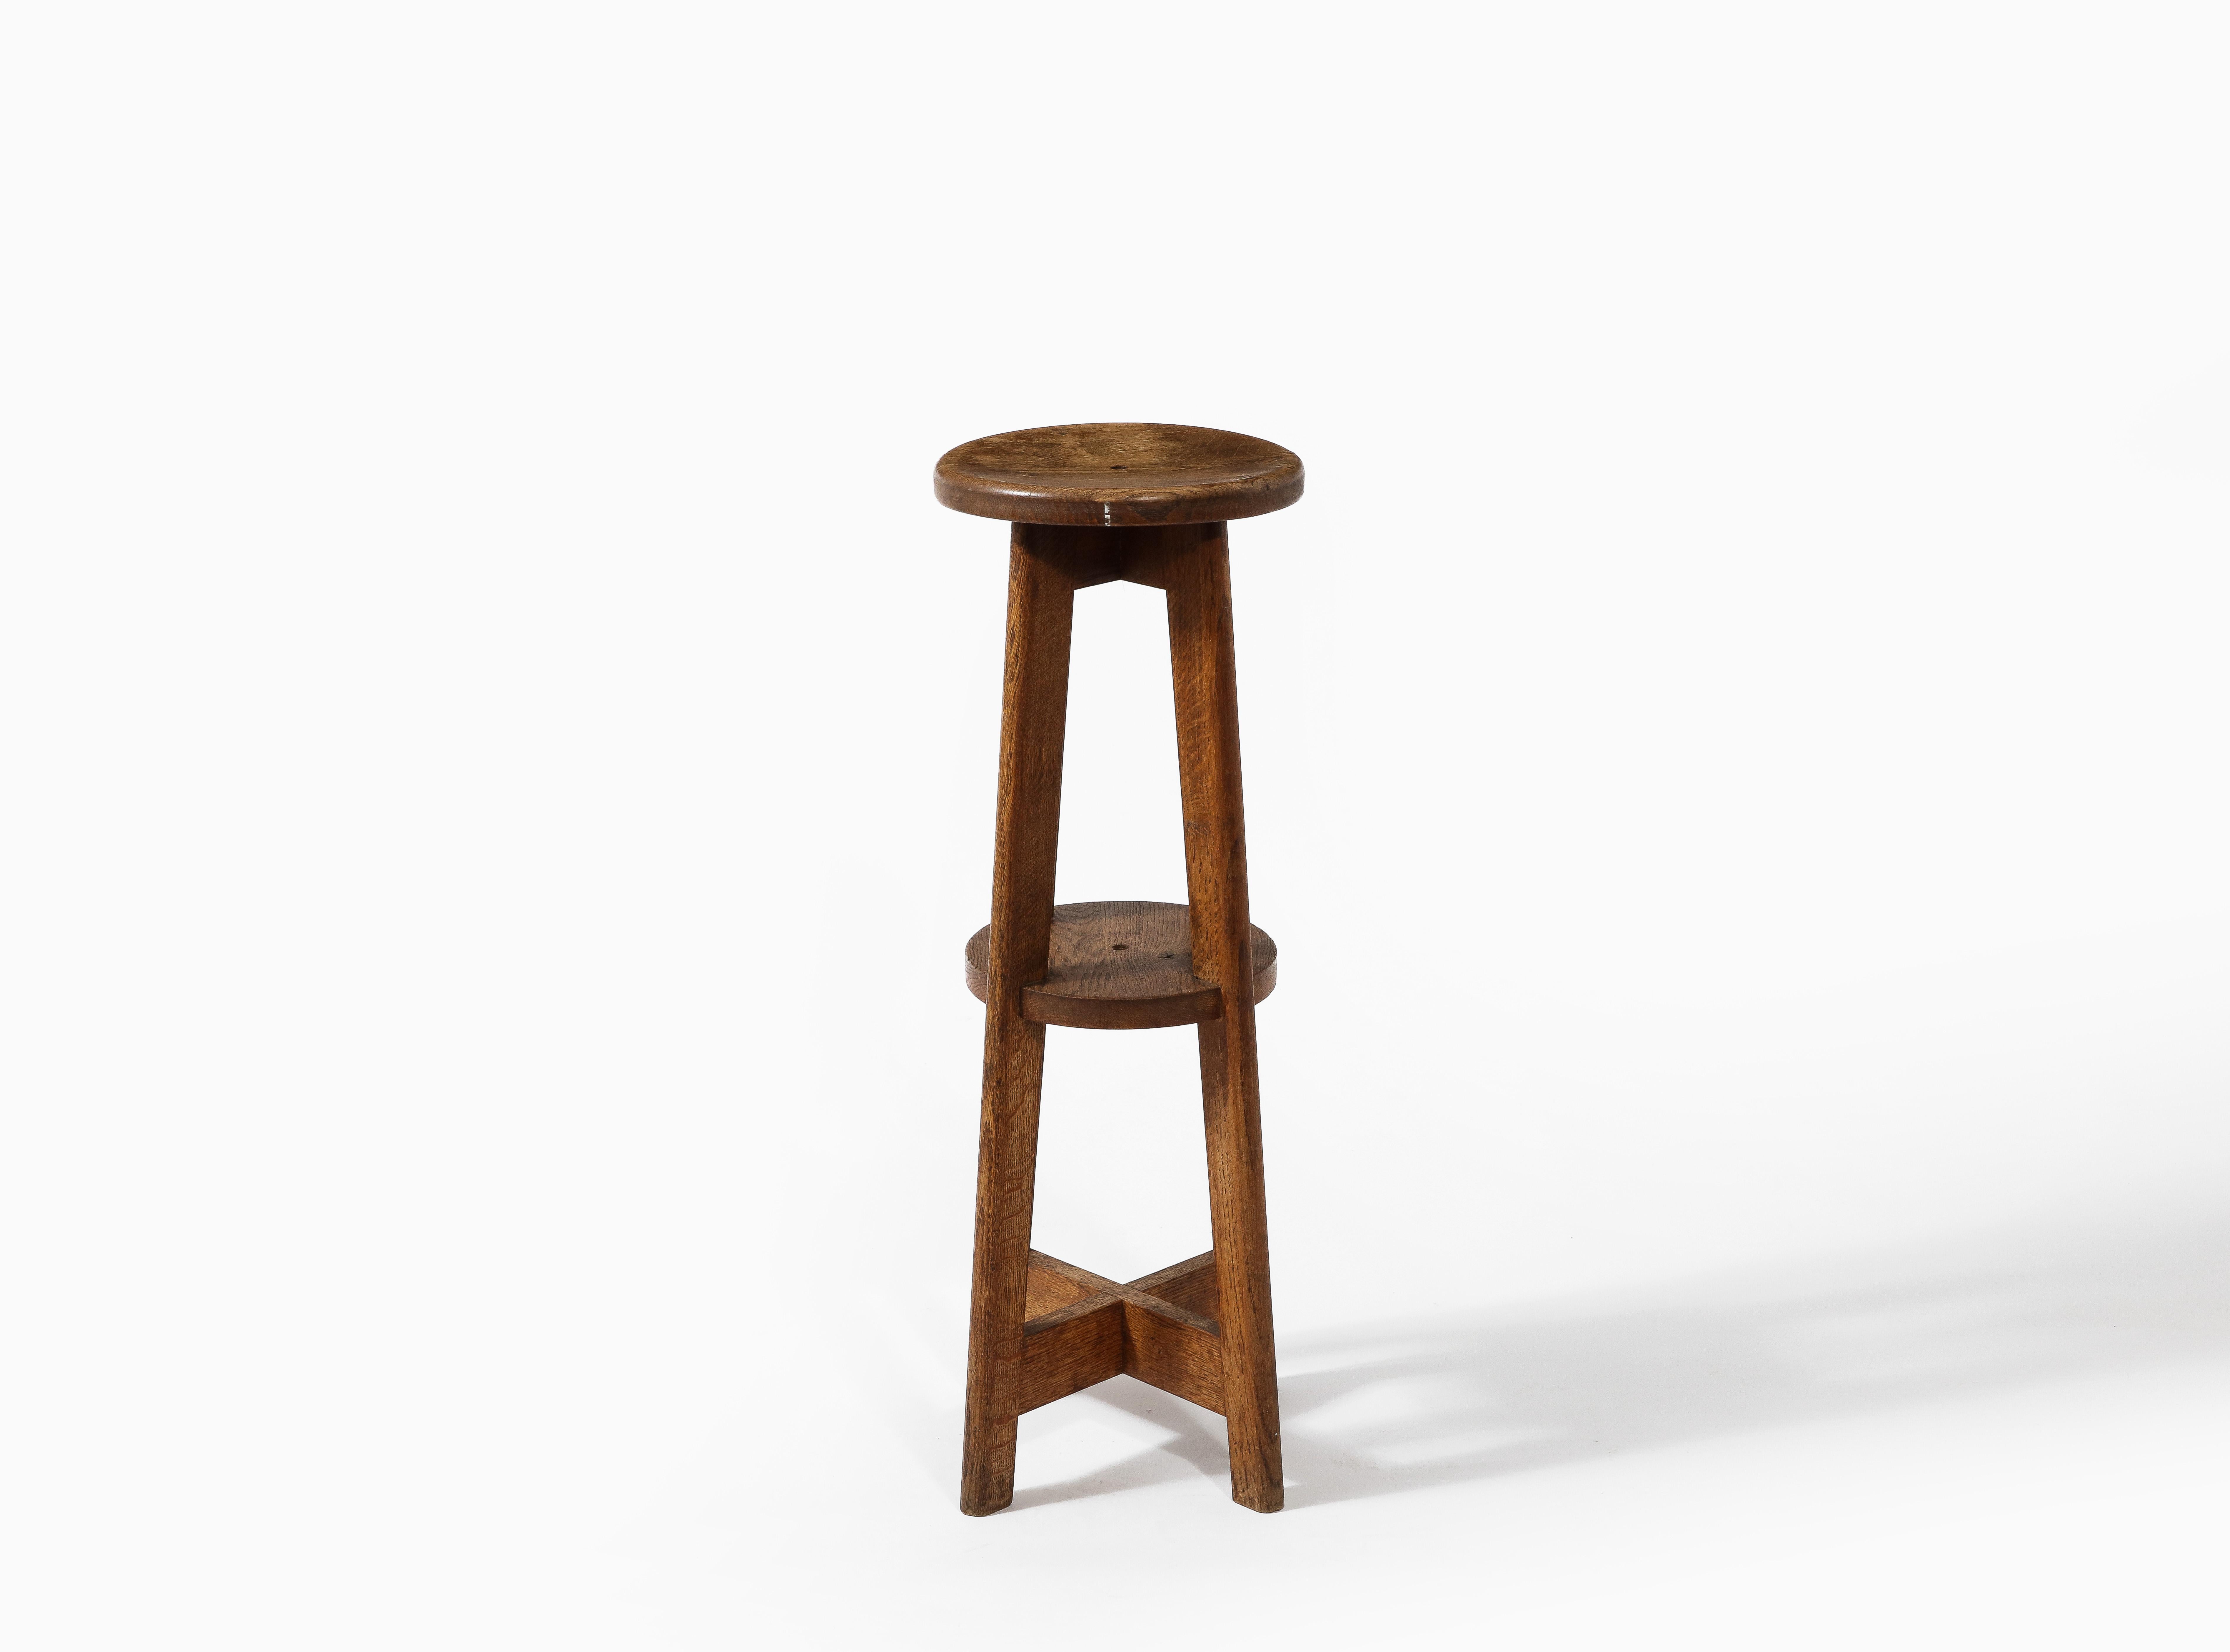 Tall Rustic Farm Stool or Pedestal in Solid Oak, France 1950's For Sale 1